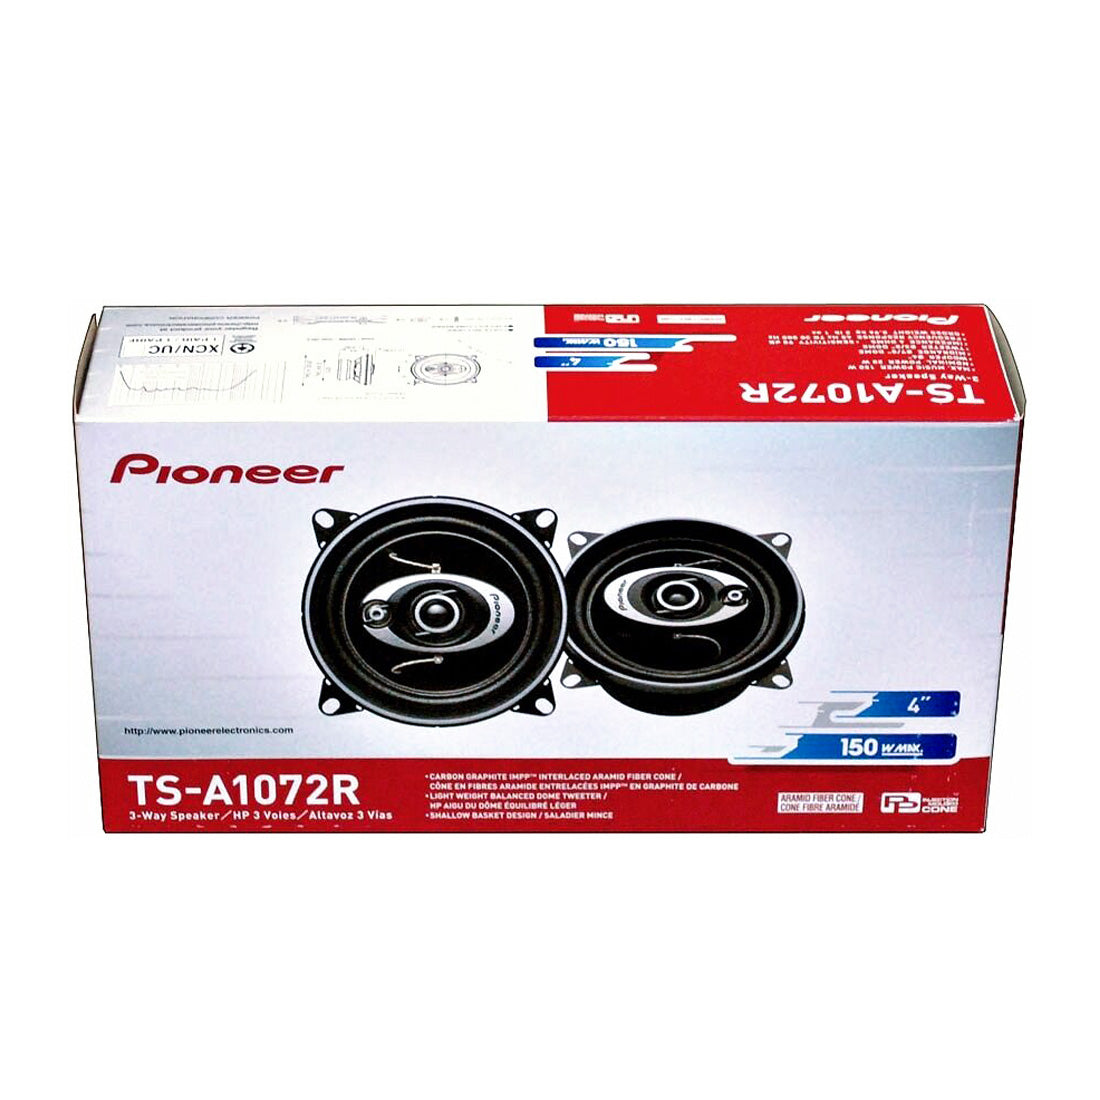 Pioneer TS-A1072R 300 W Max 4" 3-Way 4-Ohms Stereo Car Audio Speakers